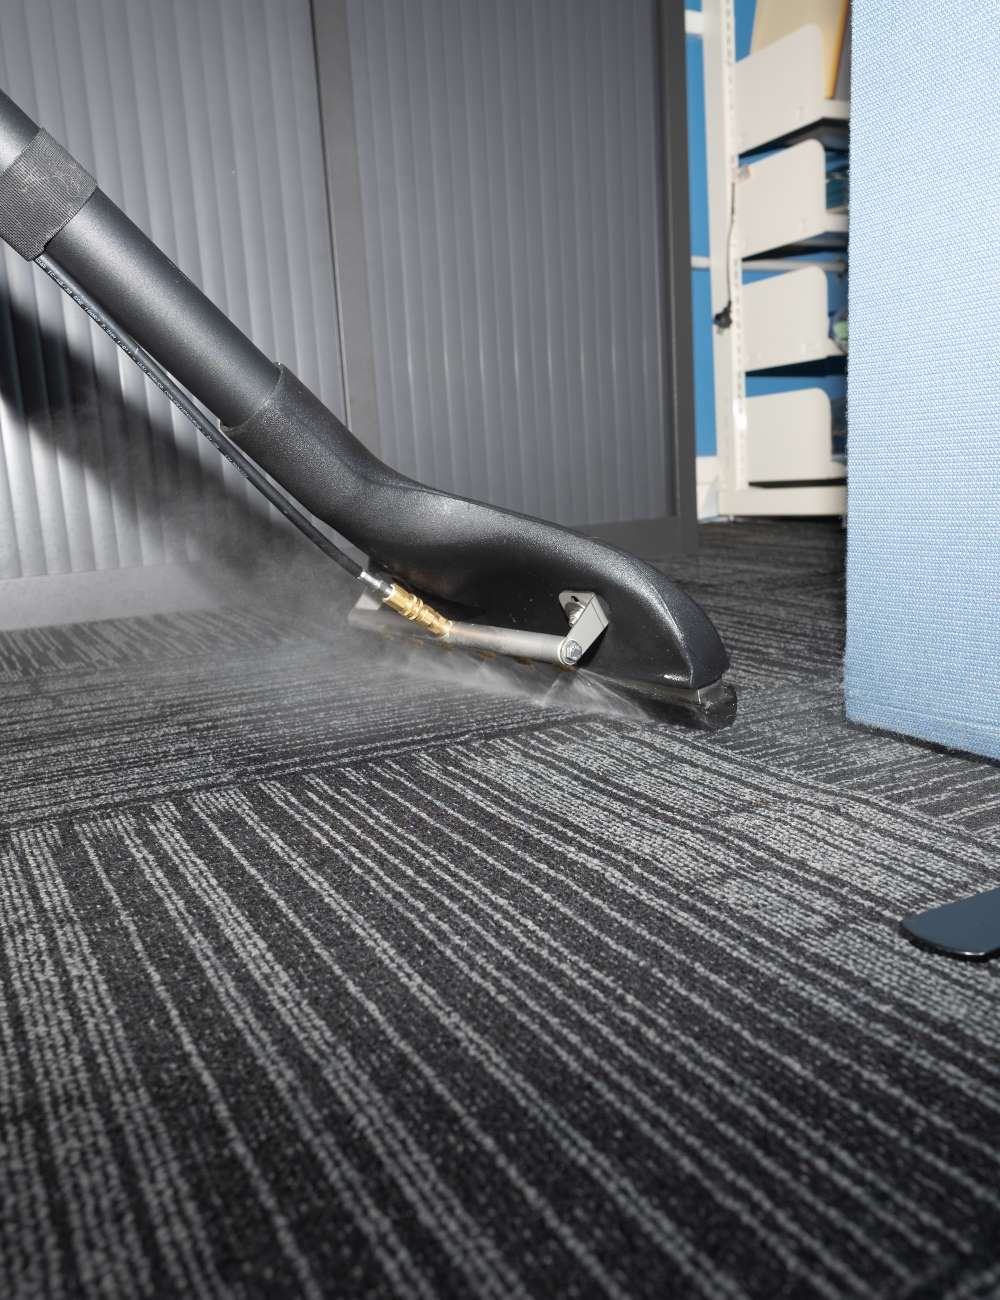 Commercial carpet cleaning in Cumbria